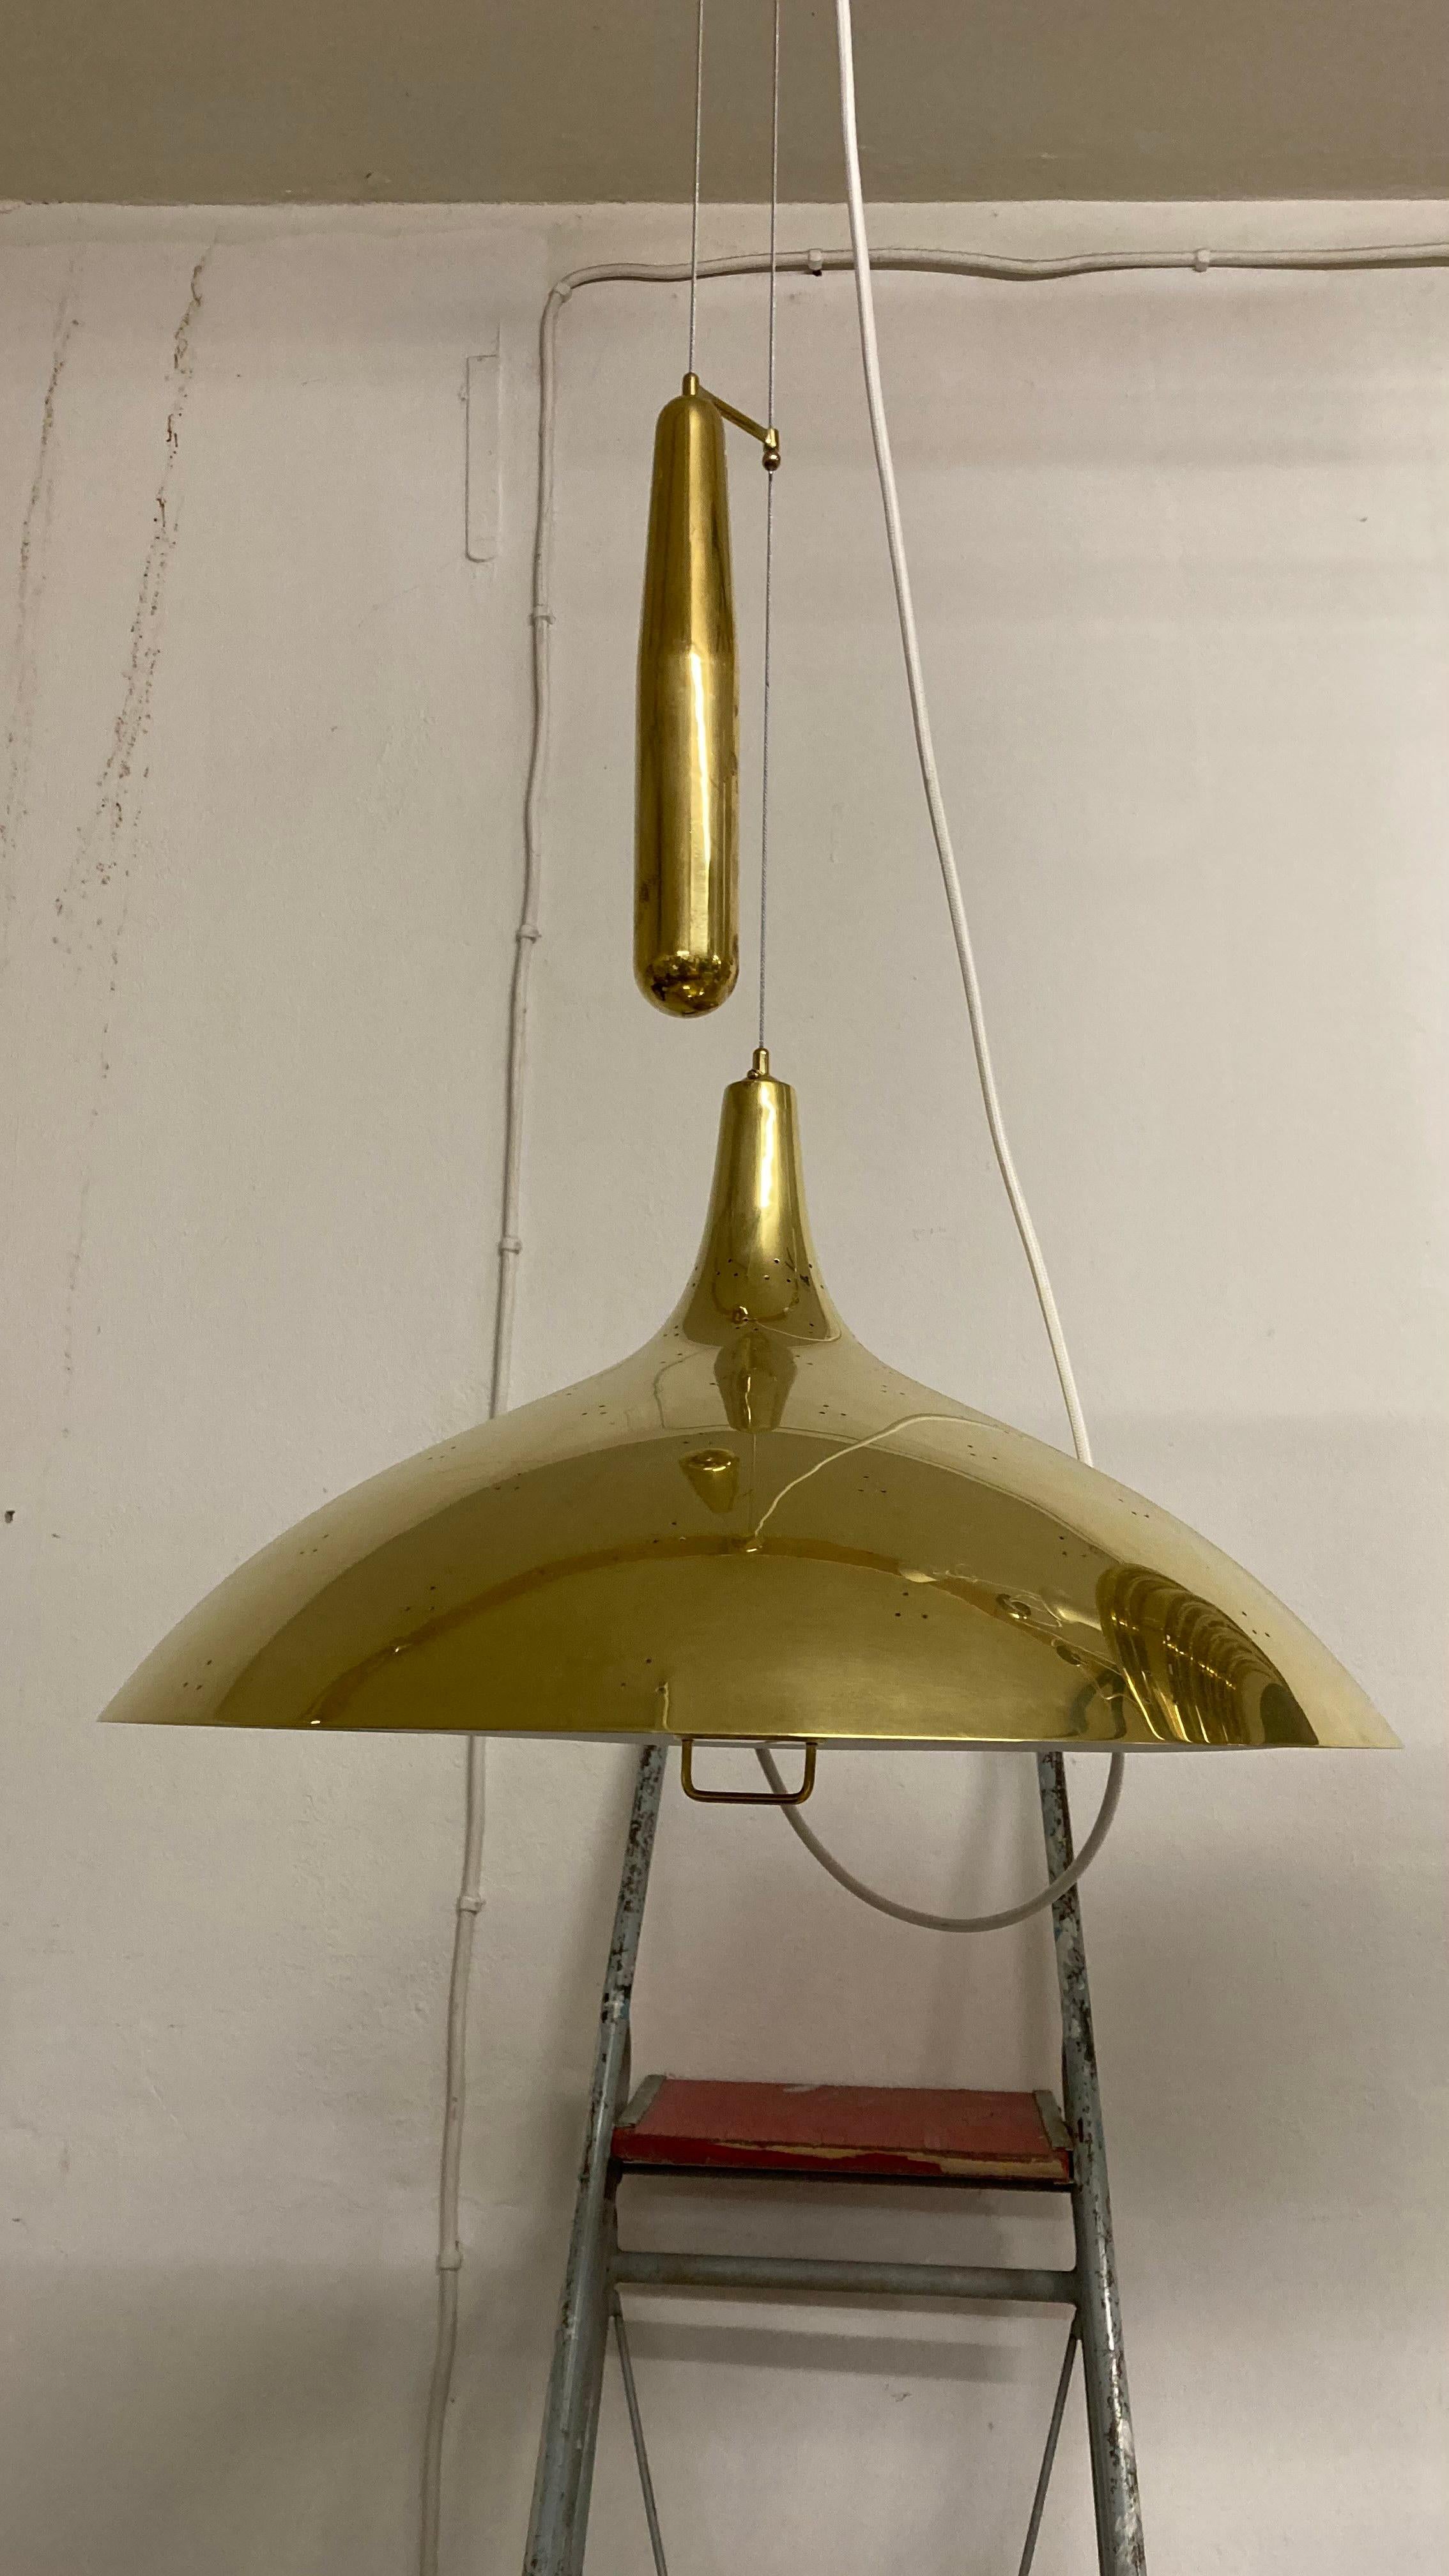 The Paavo Tynell brass counterweight light A1965 for TAITO Oy is a stunning addition to any interior design. With its iconic design and high-quality brass finish, this light fixture adds a touch of elegance and sophistication to any space. The